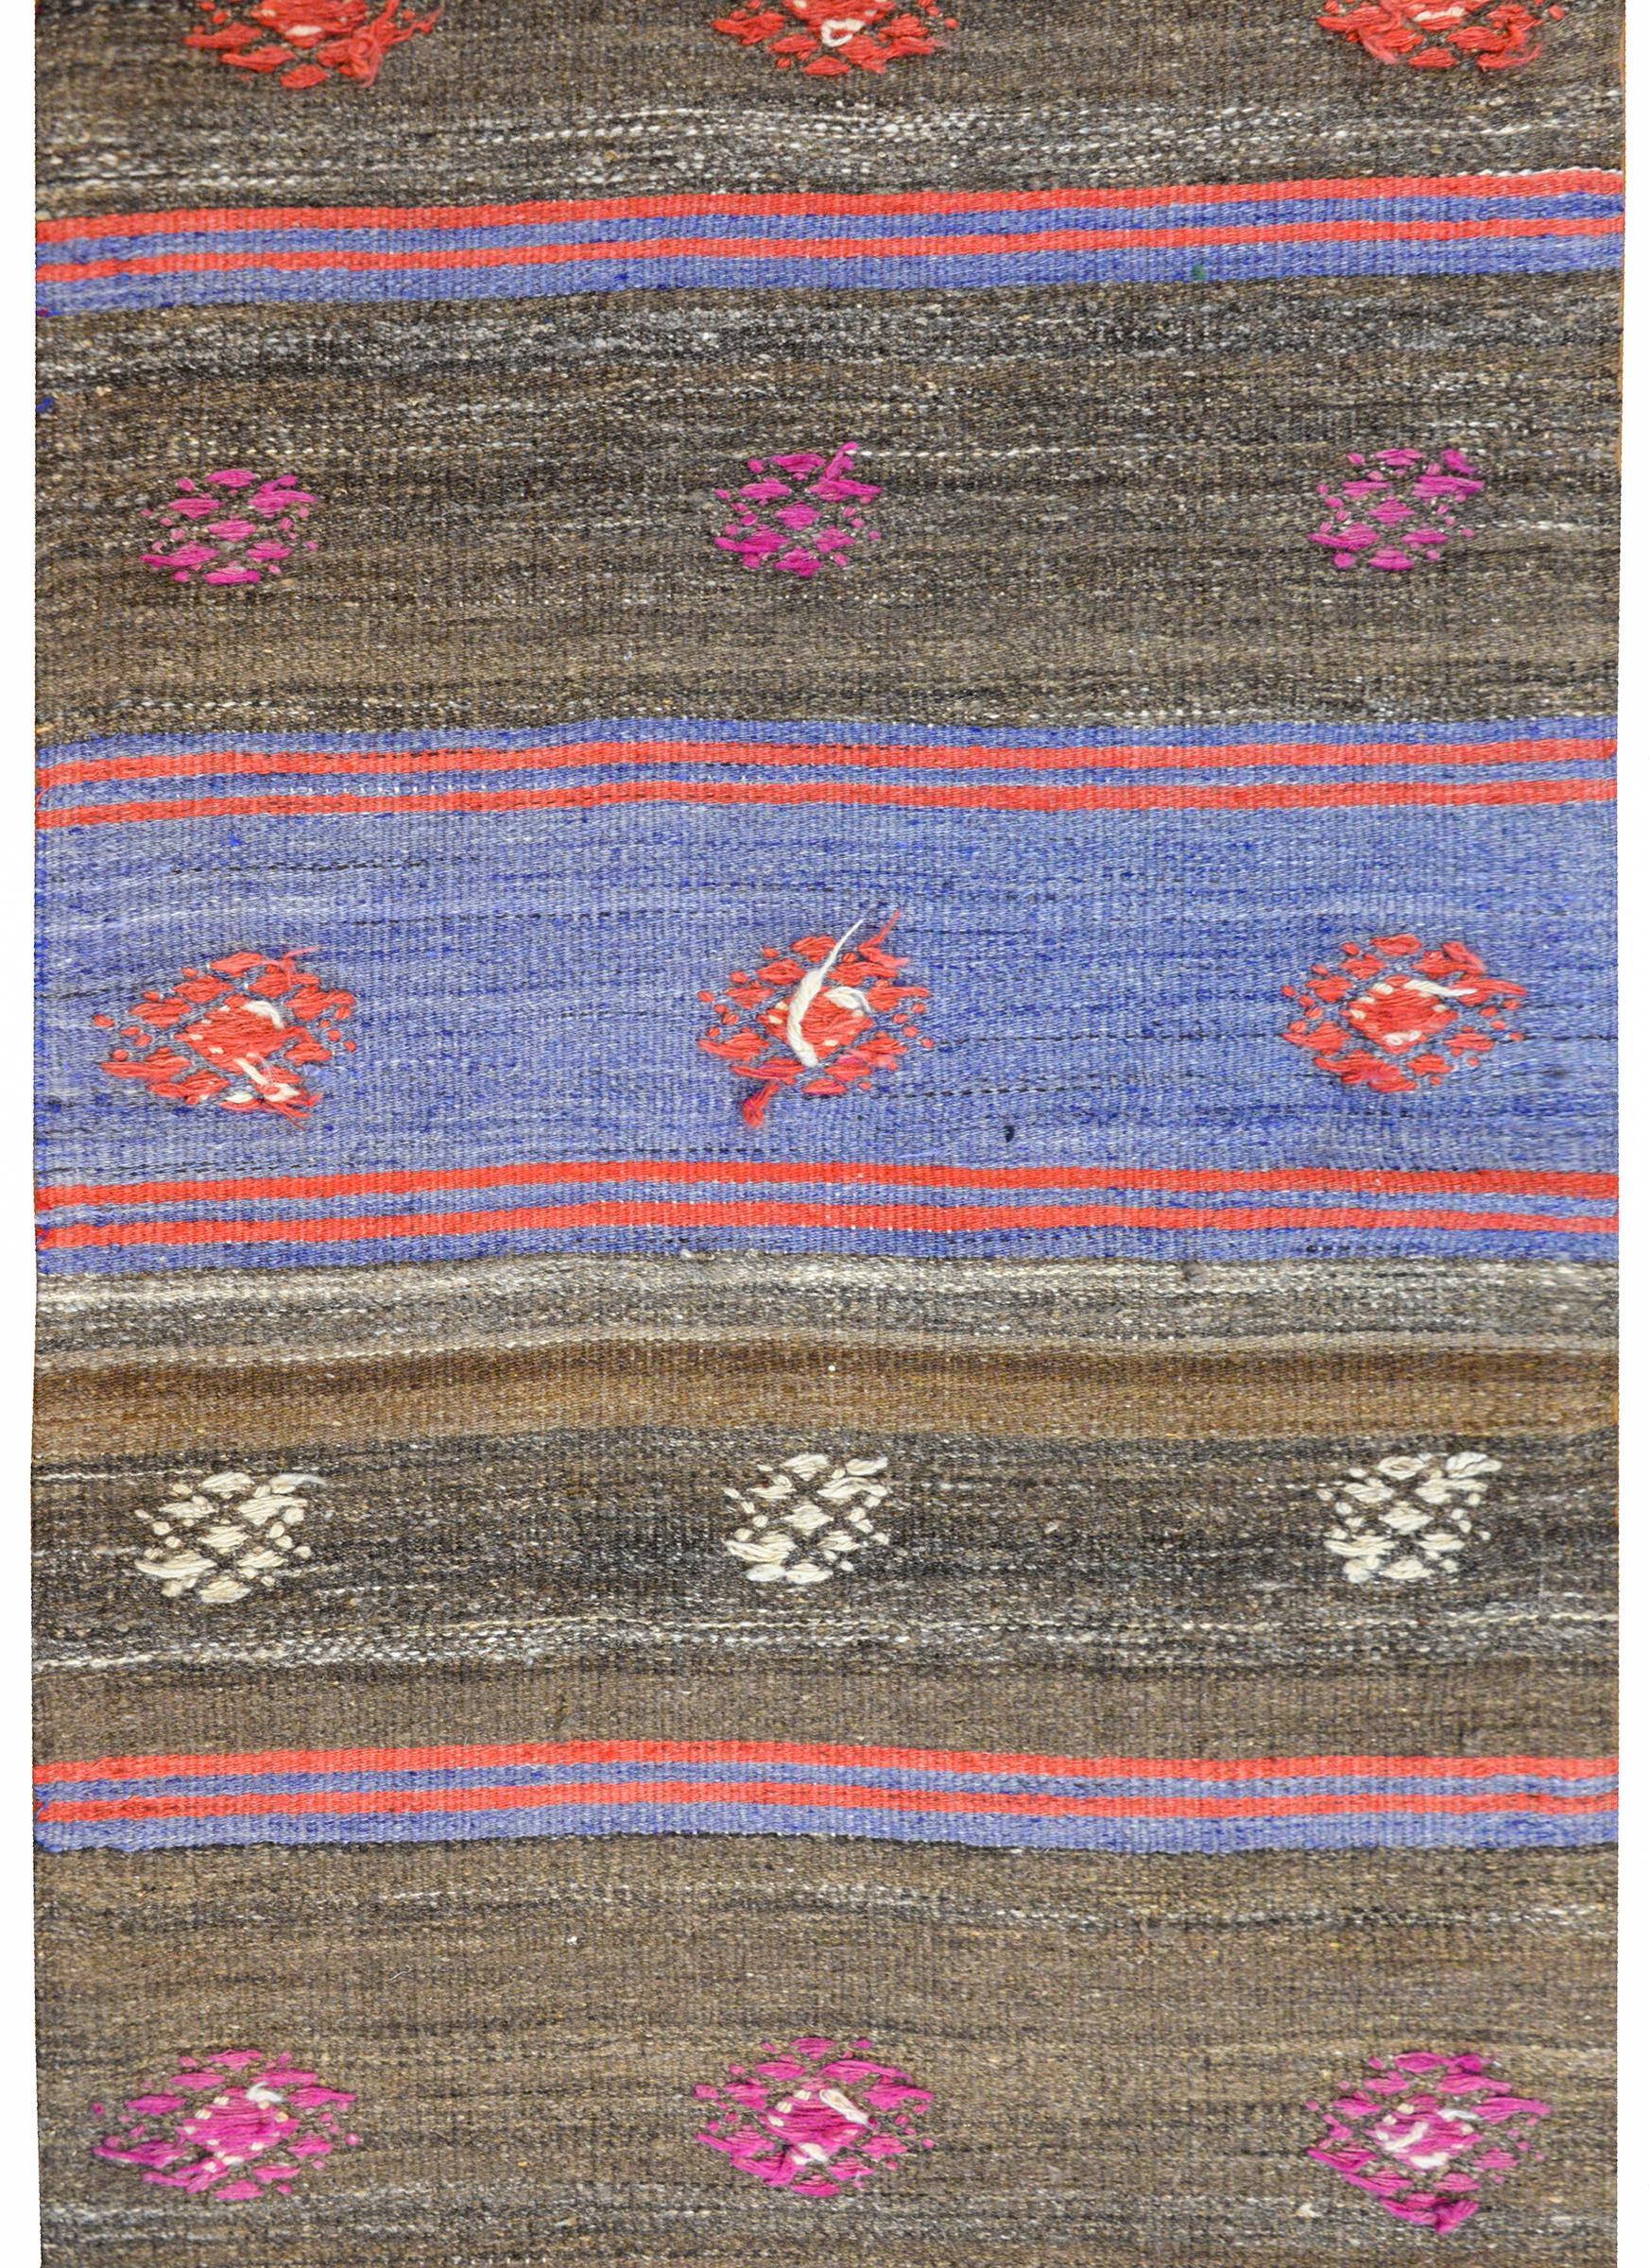 Vintage Konya Kilim Runner In Good Condition For Sale In Chicago, IL